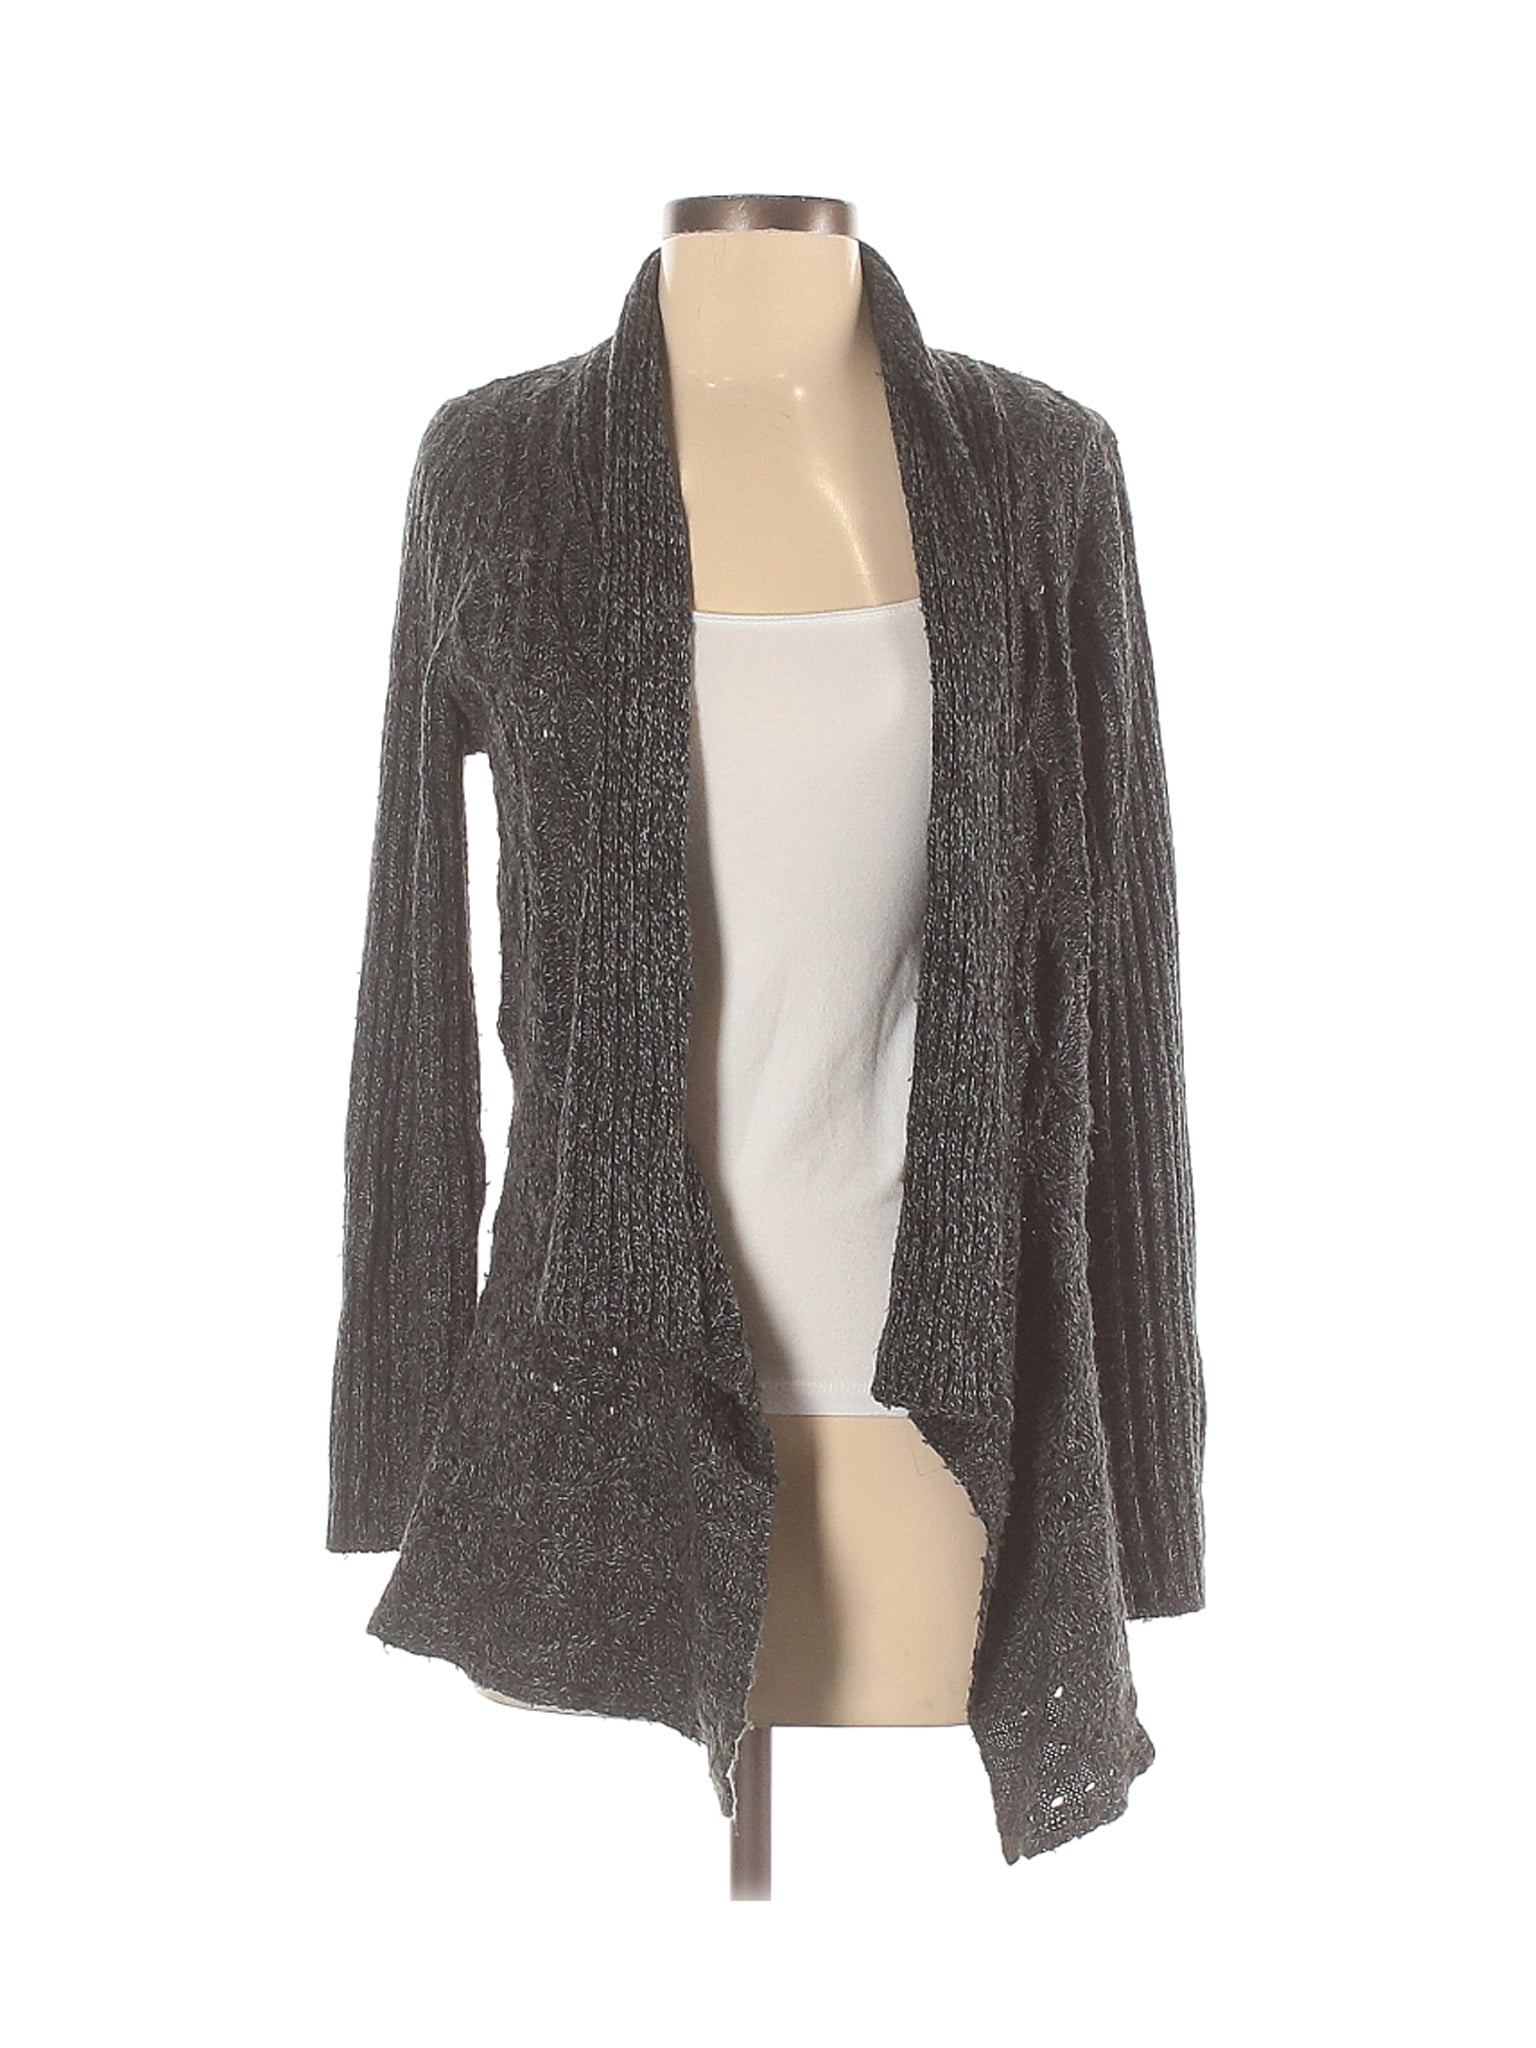 89th and Madison - Pre-Owned 89th & Madison Women's Size S Cardigan ...